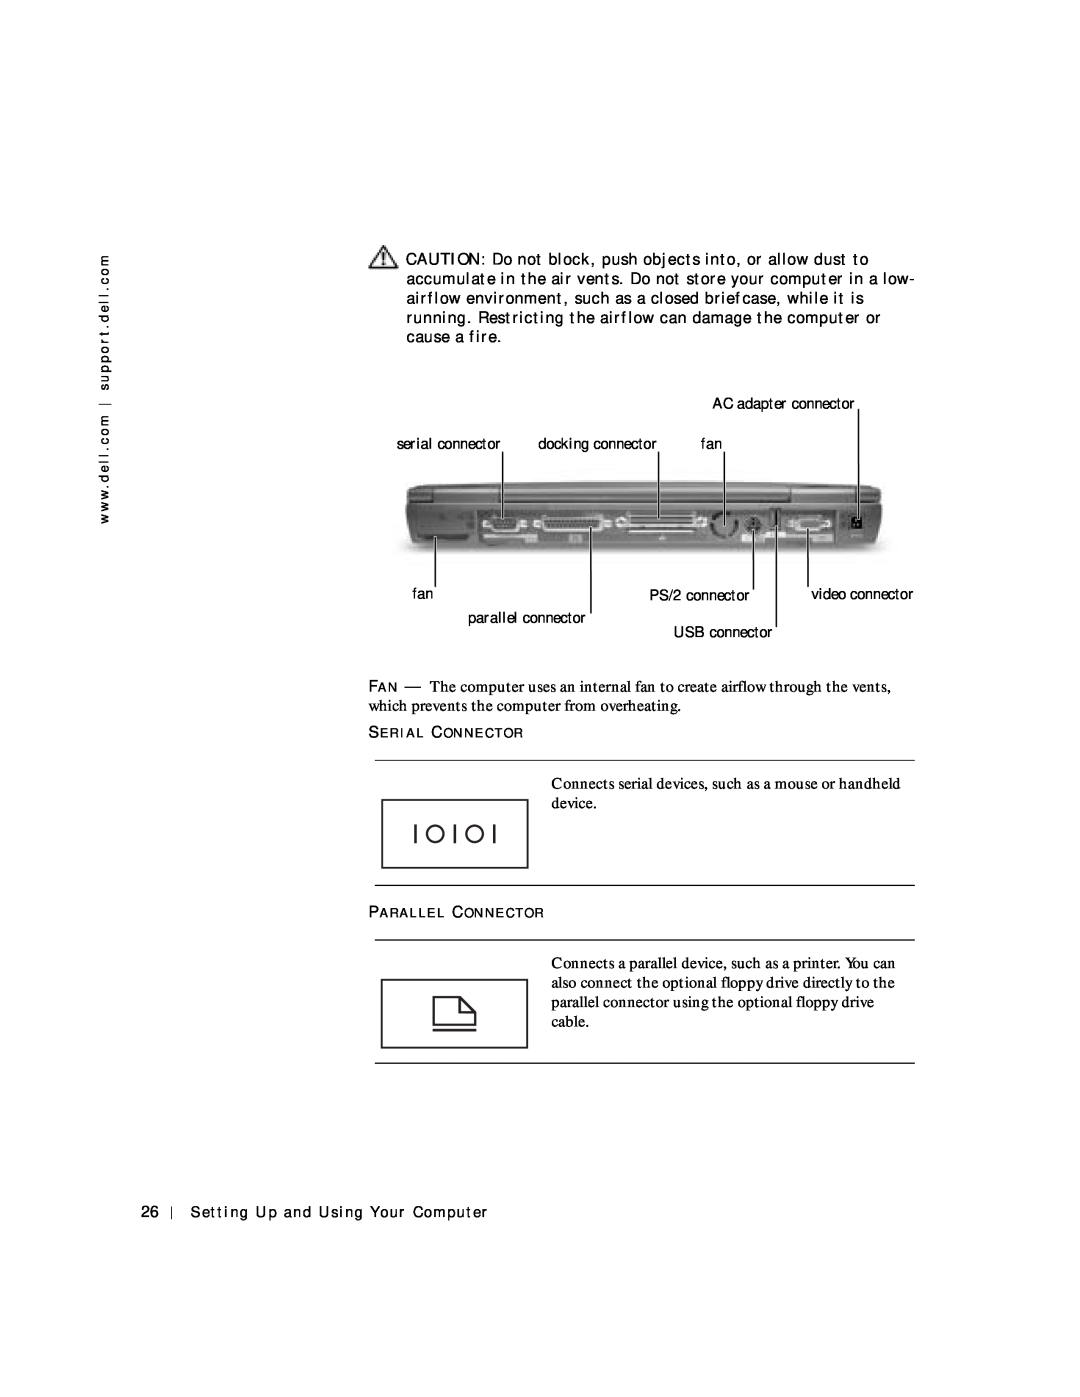 Dell 4150 owner manual Connects serial devices, such as a mouse or handheld device 